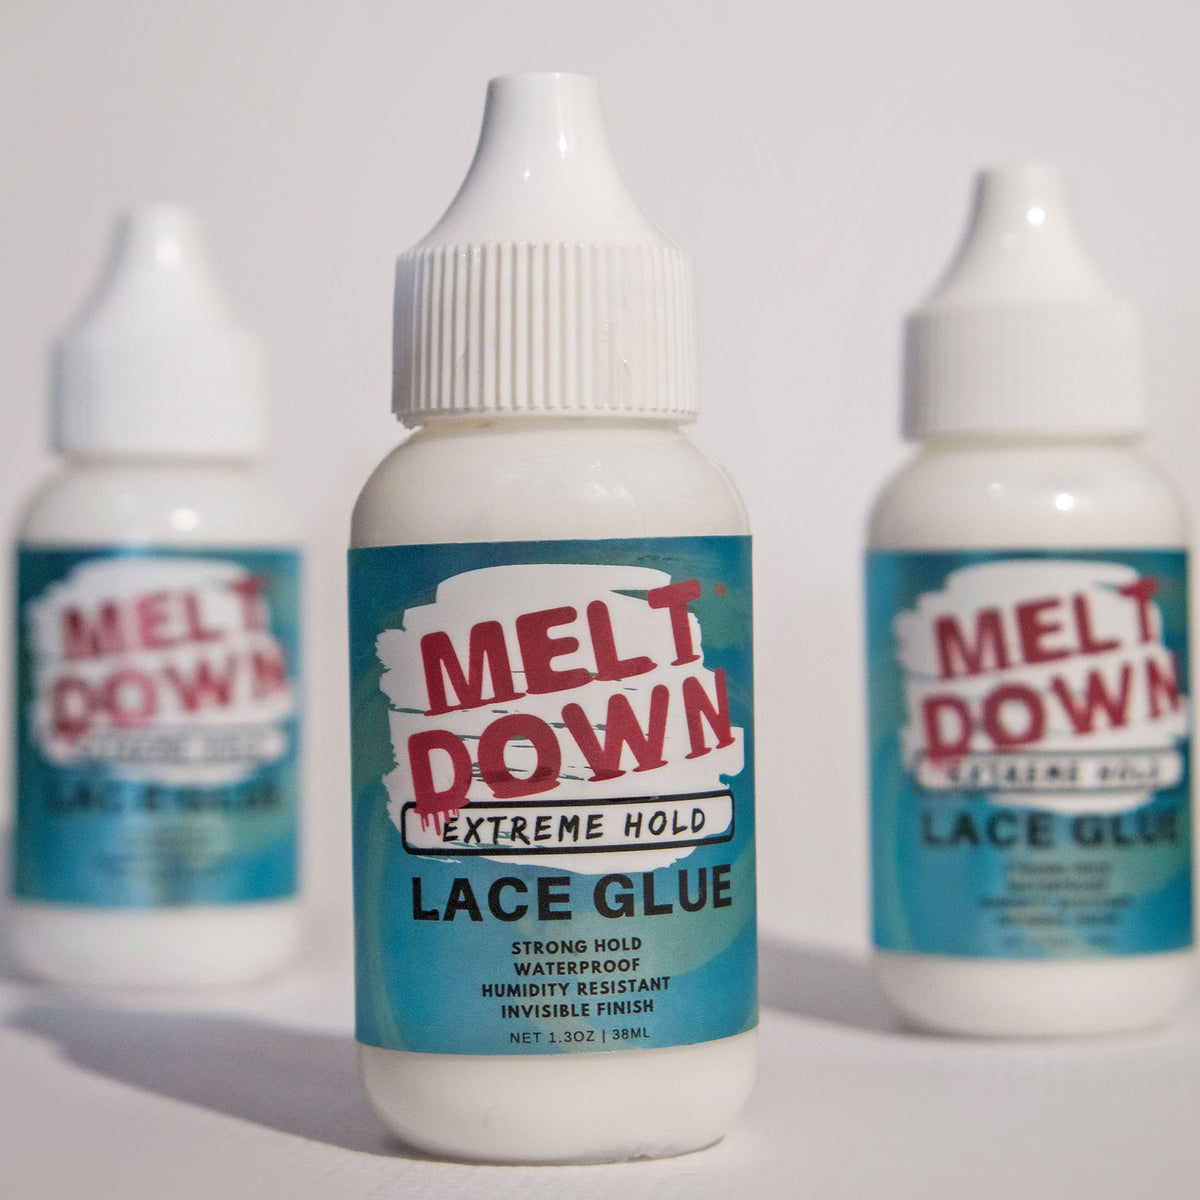 Get Laced” Queen's Lace Glue